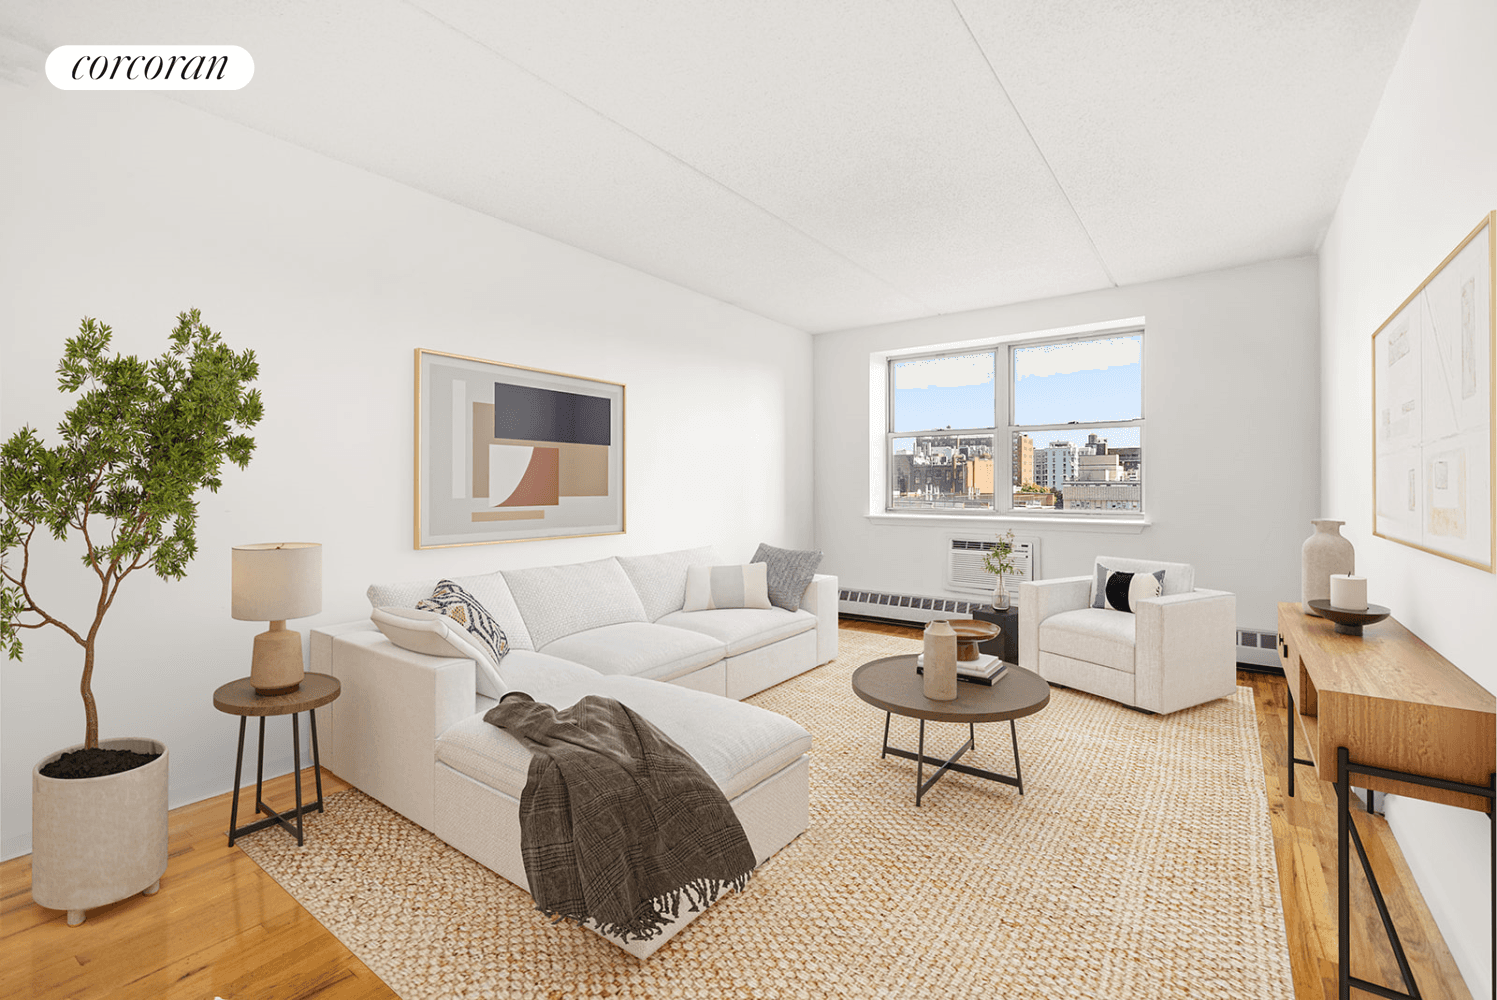 Introducing a one bedroom jewel, perfectly situated at 1825 Madison Avenue.